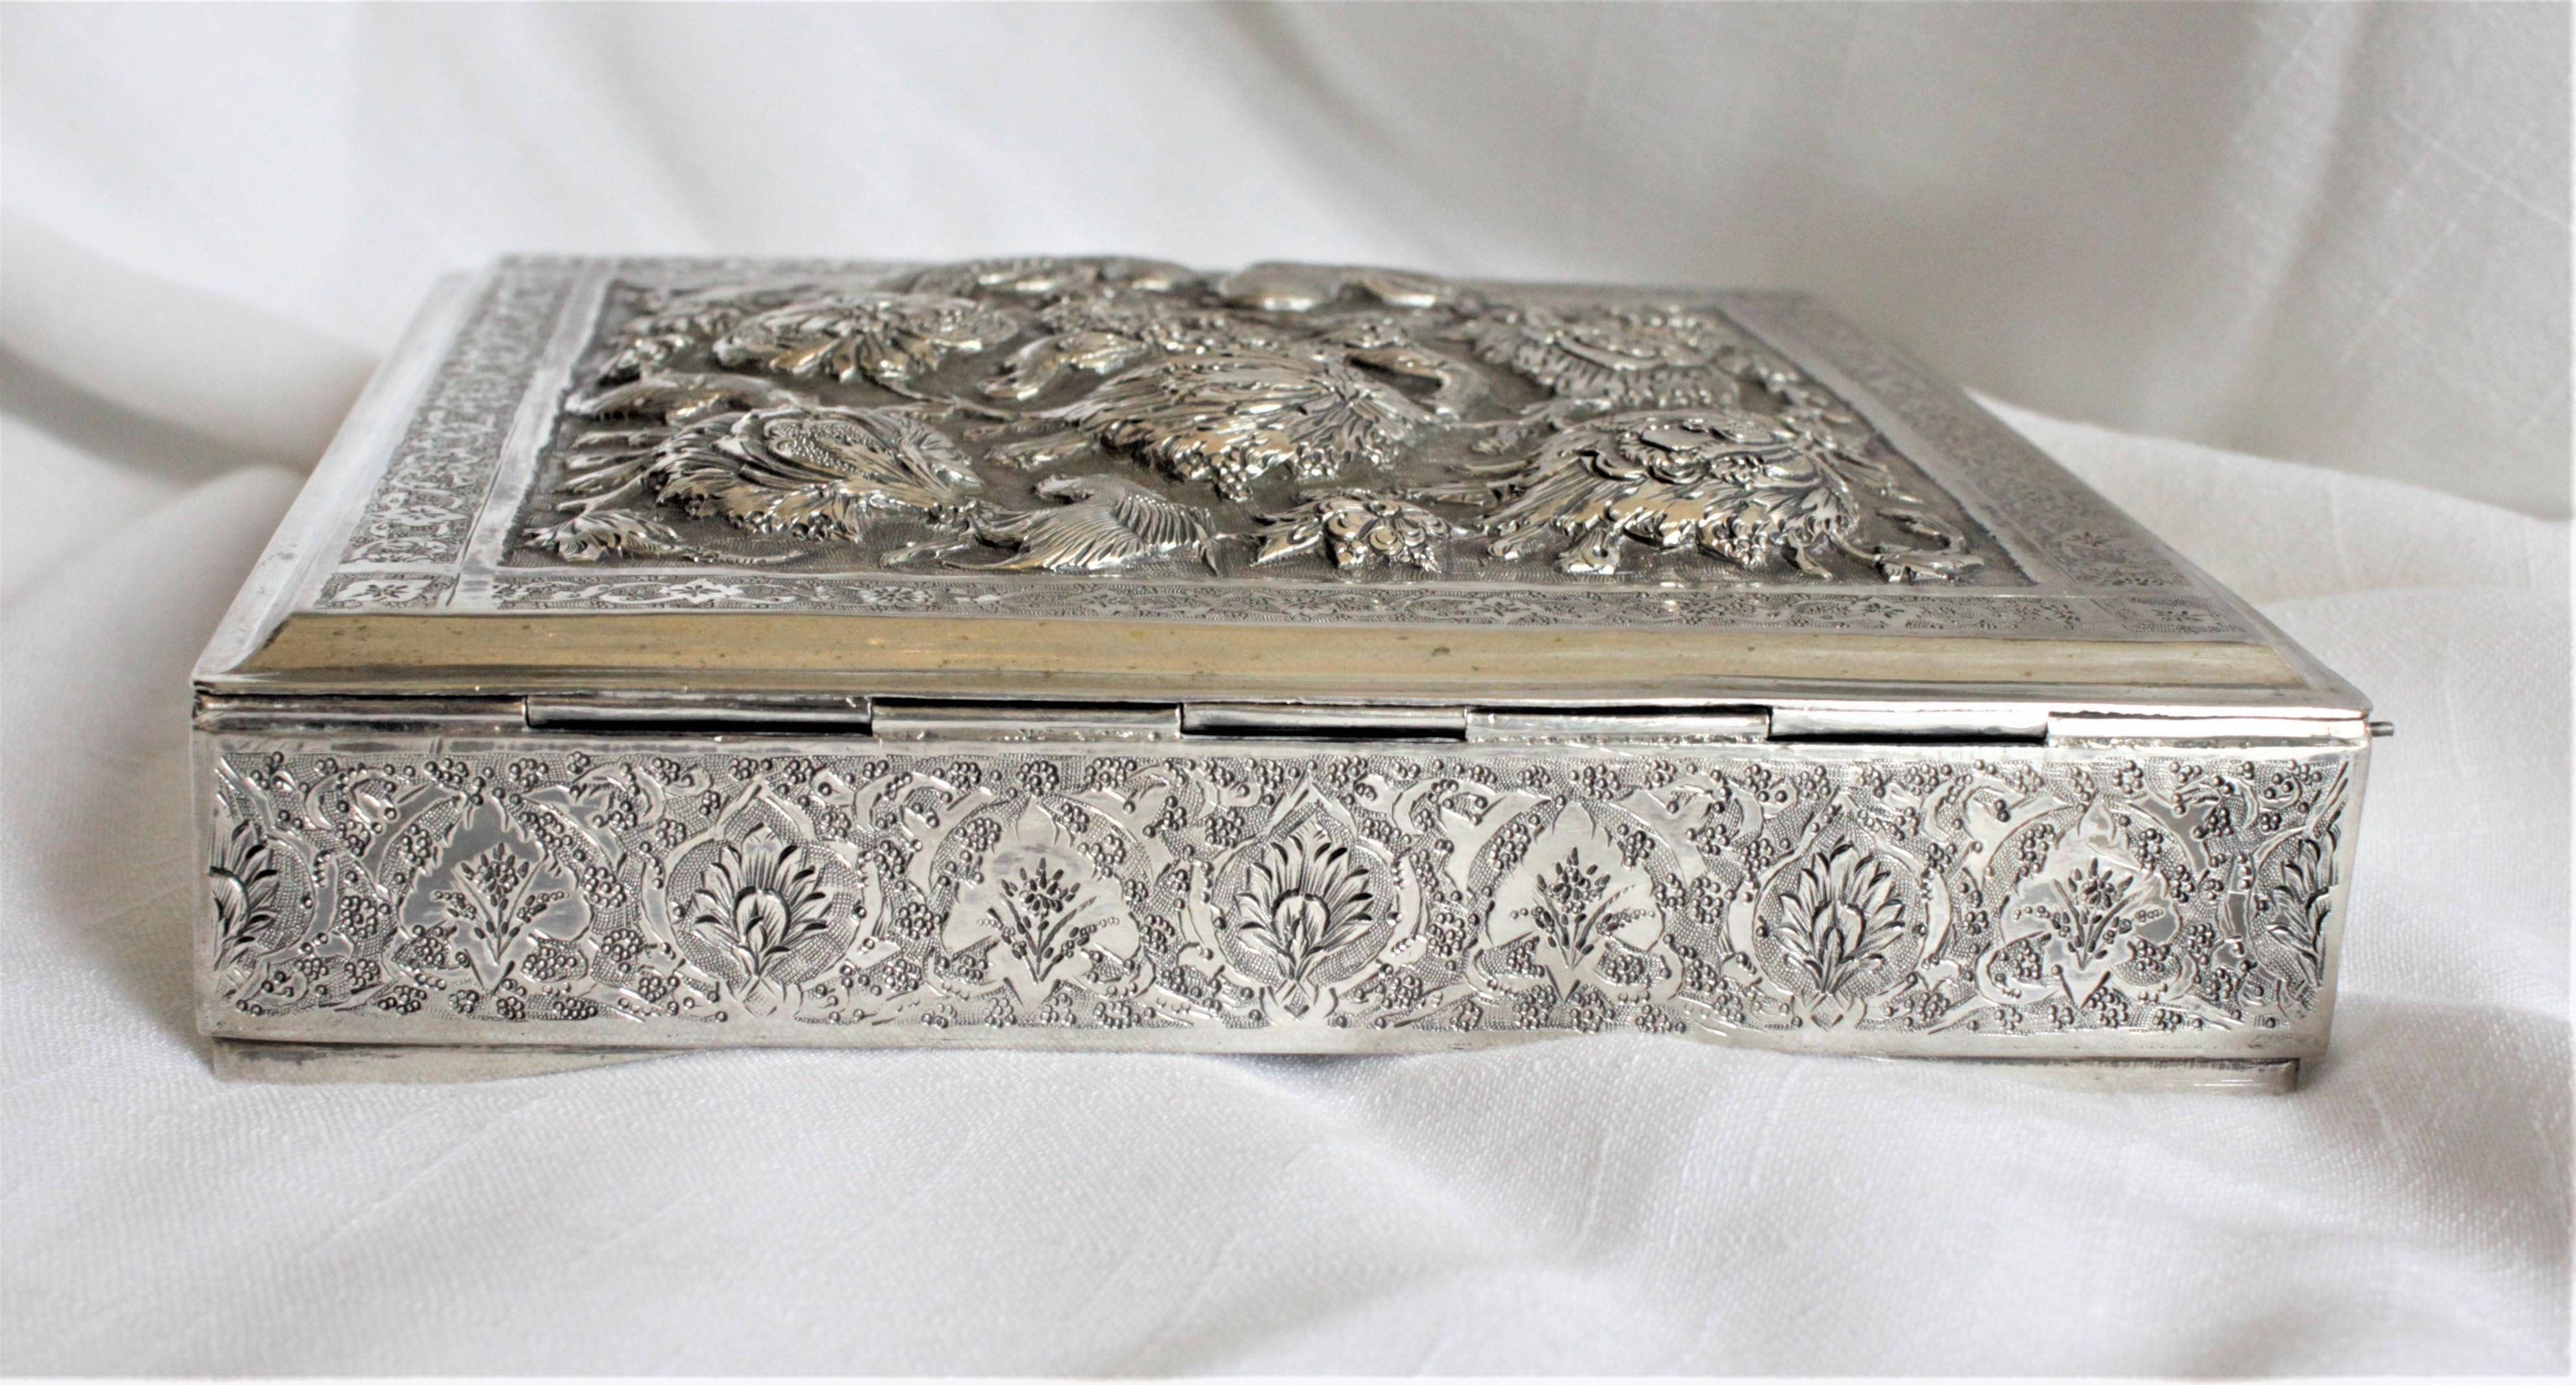 Antique Anglo-Indian Silver Box with Hand Chased and Repousse Decoration In Excellent Condition For Sale In Hamilton, Ontario